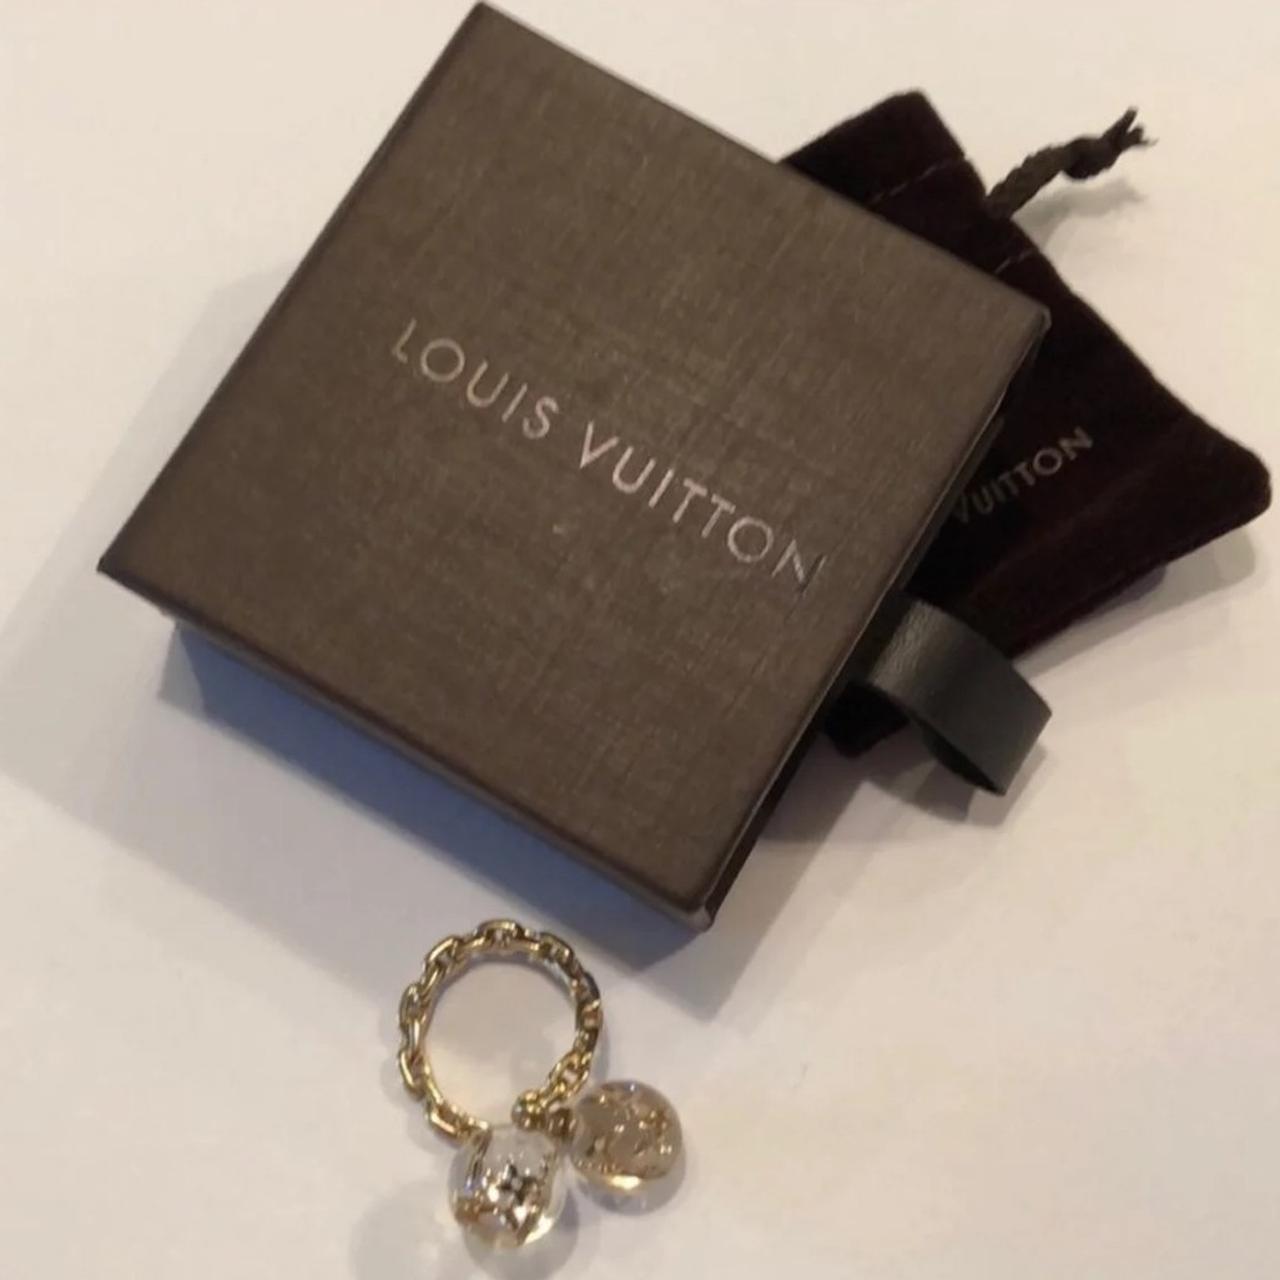 Louis Vuitton Iconic V Ring In Gold - Size M. Small - Depop